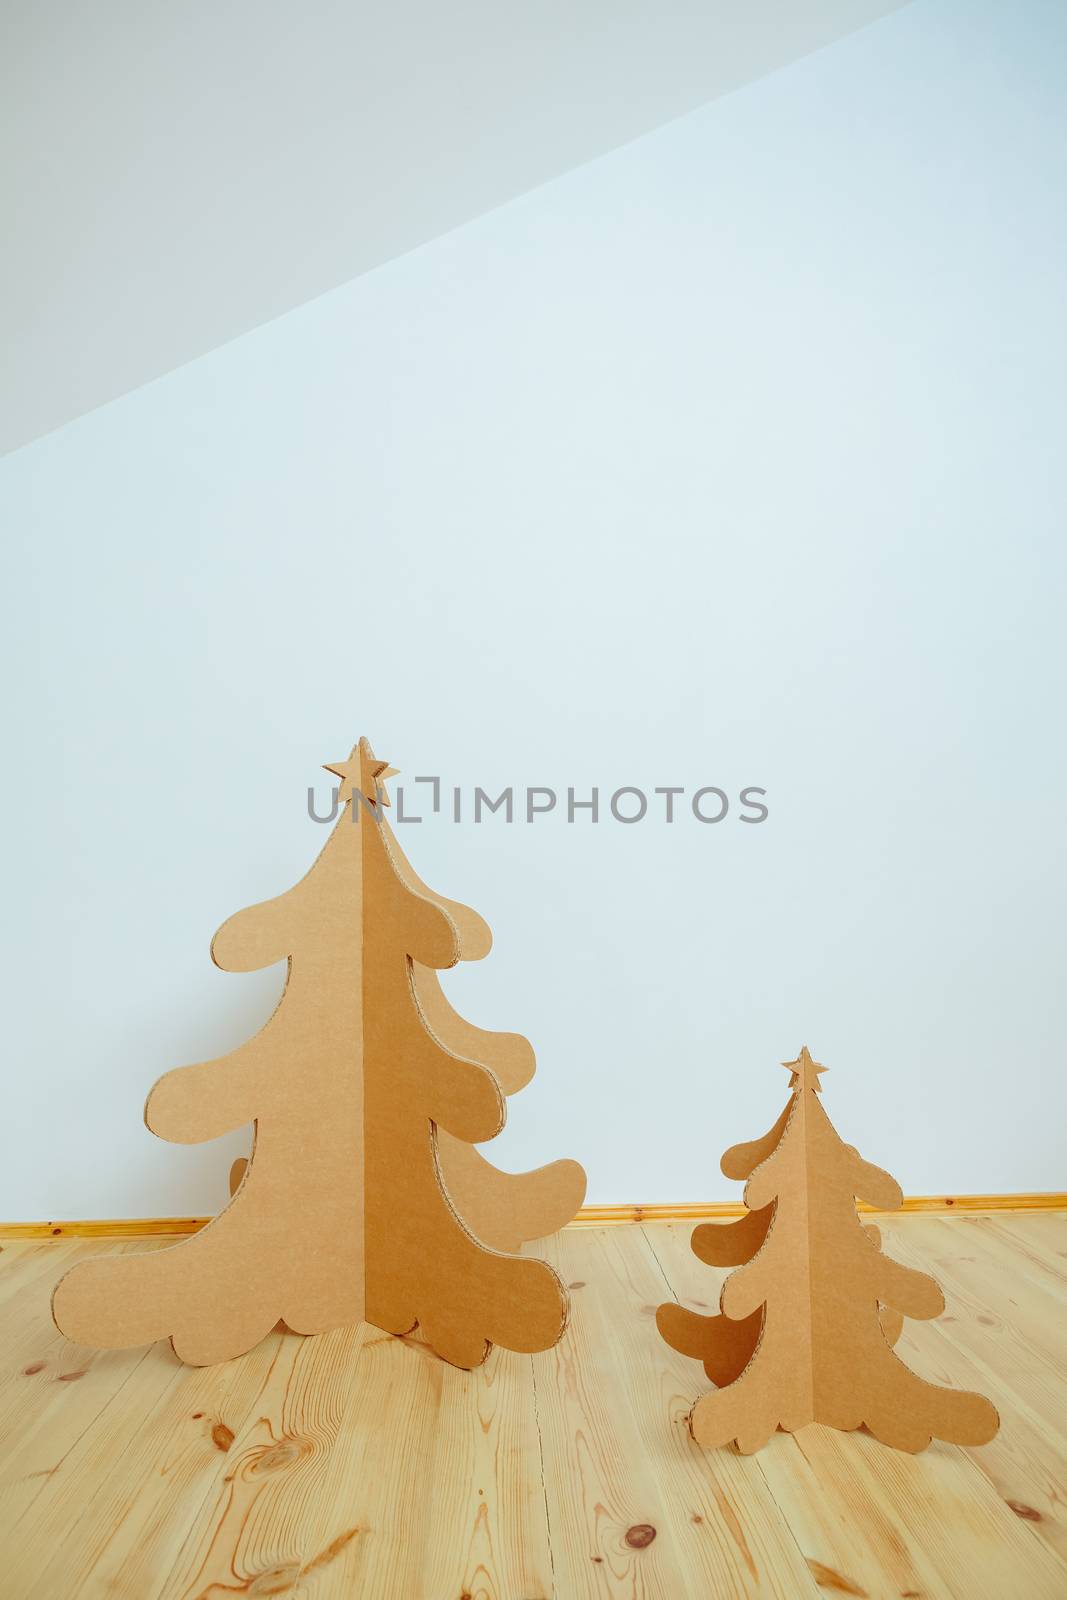 Christmas Tree Made Of Cardboard. Unique Trees. New Year